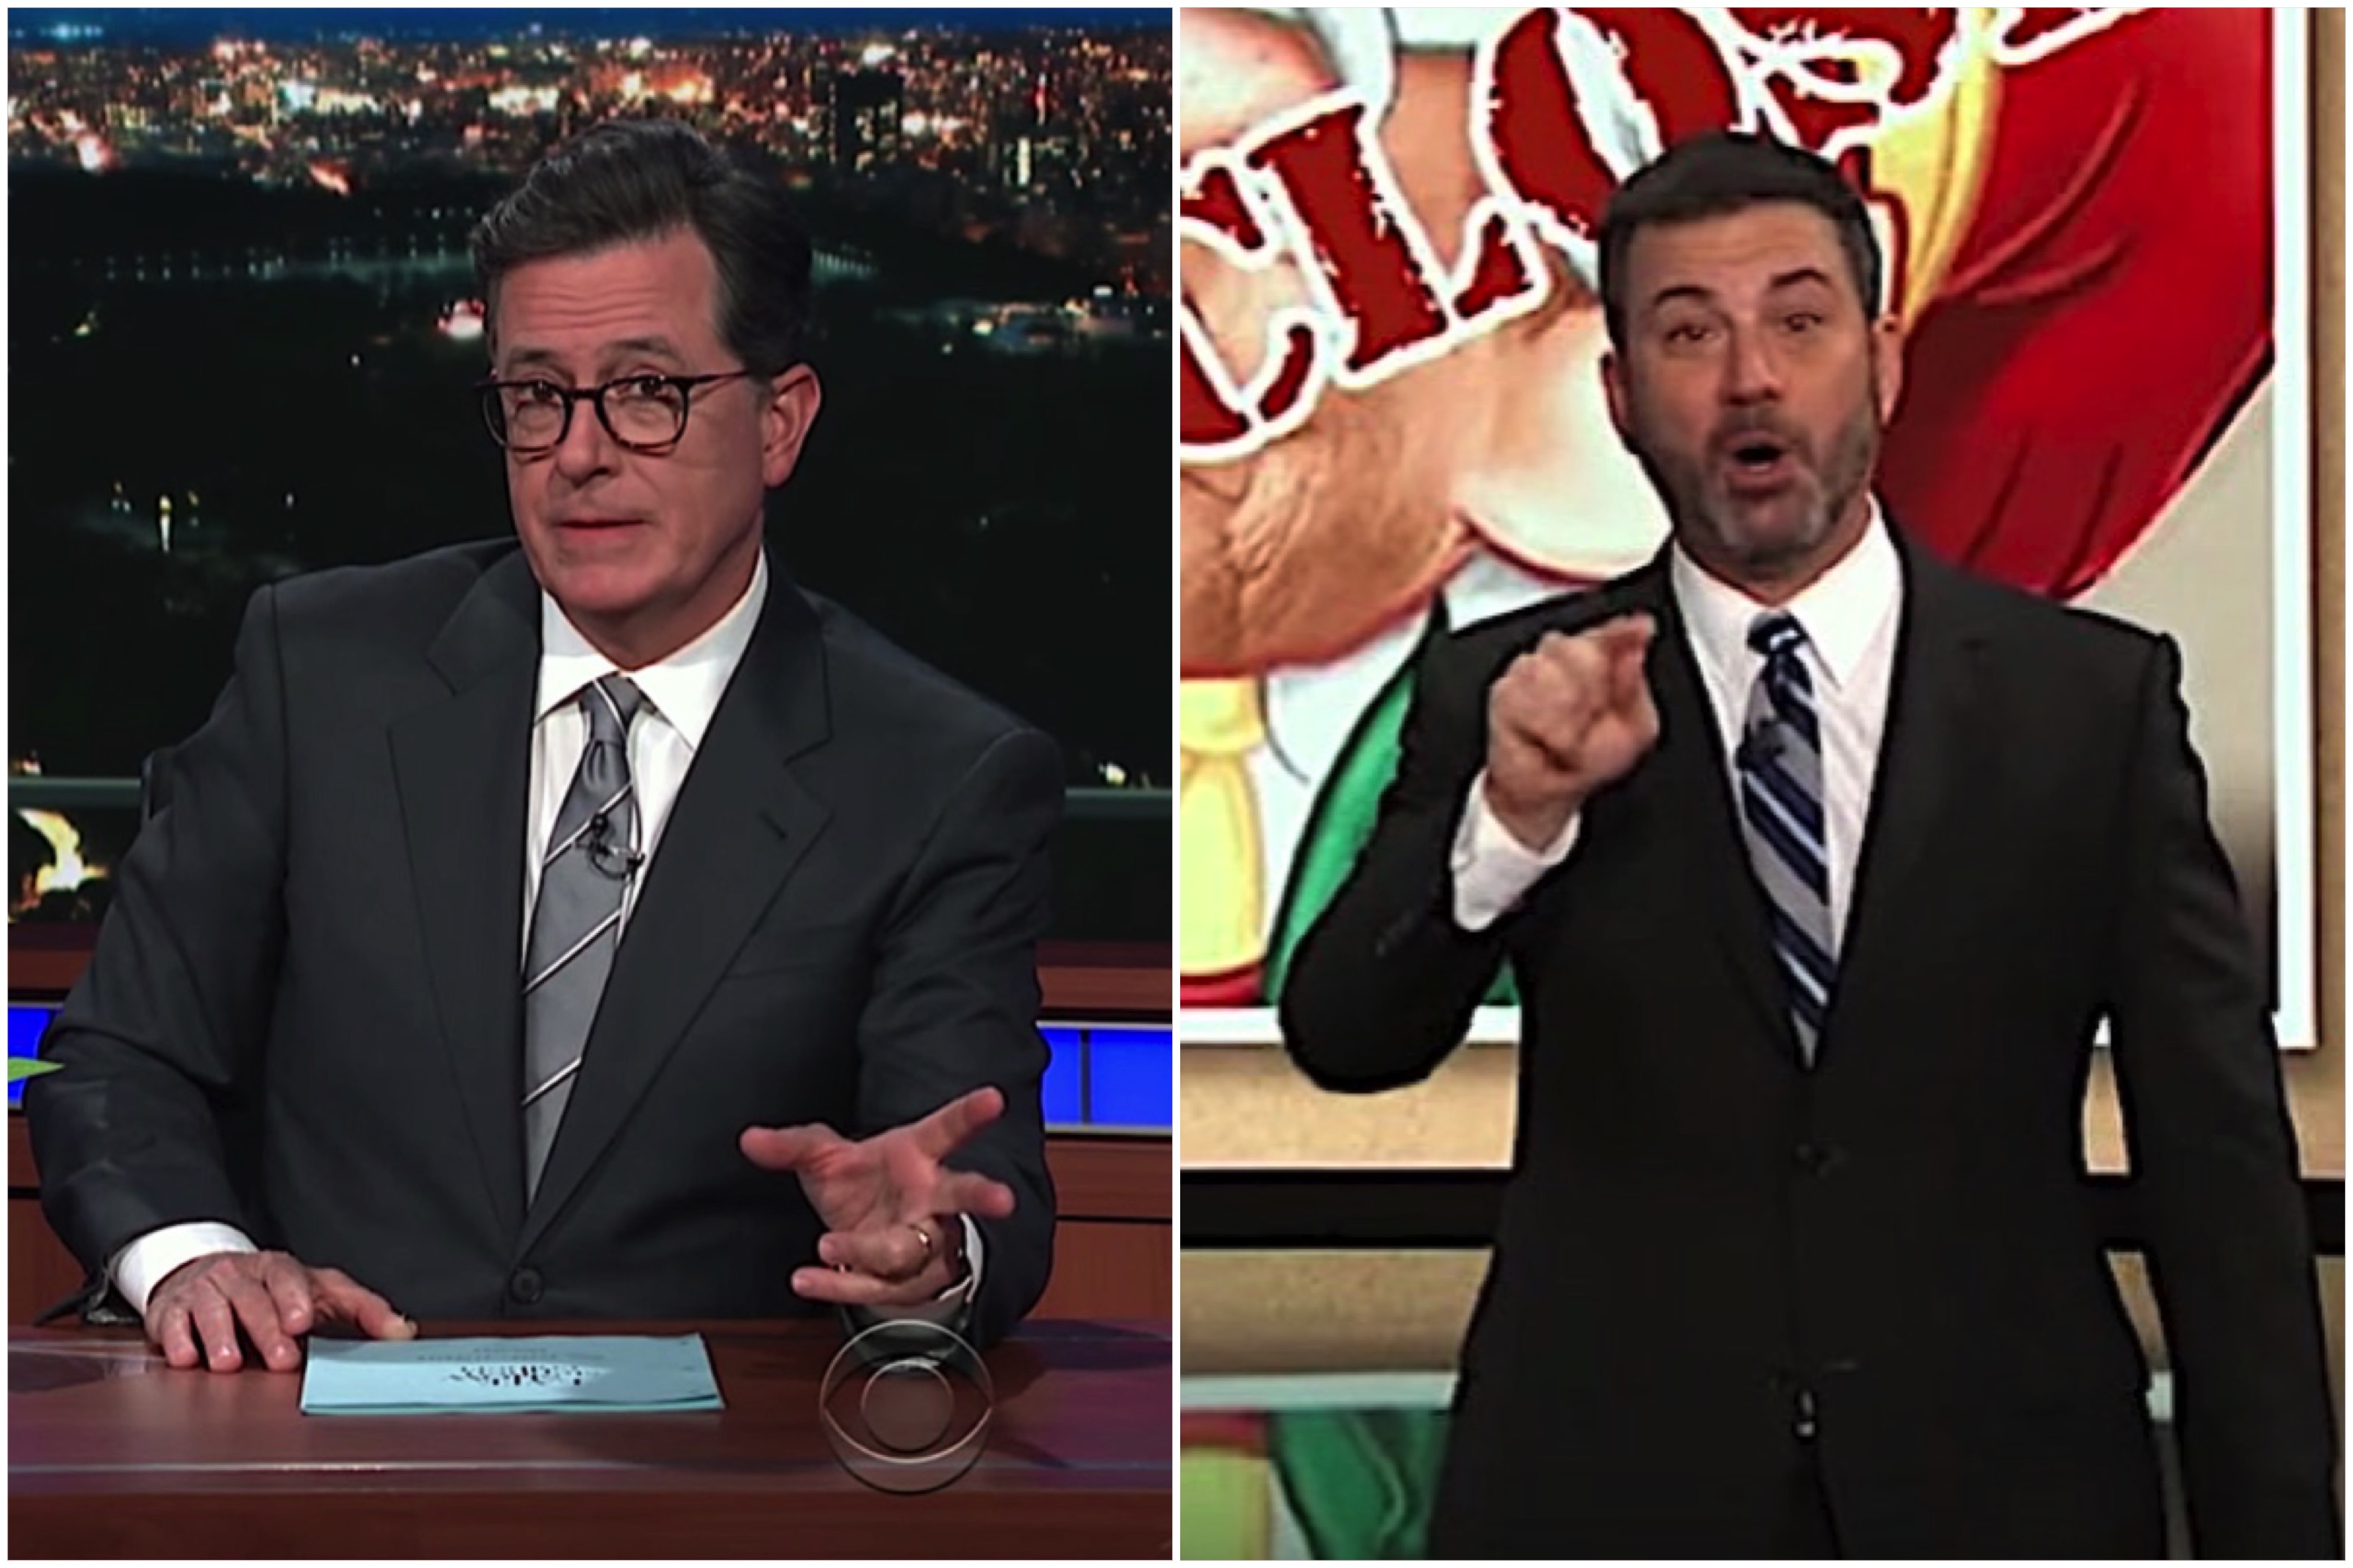 Jimmy Kimmel and Stephen Colbert rip Jeff Sessions